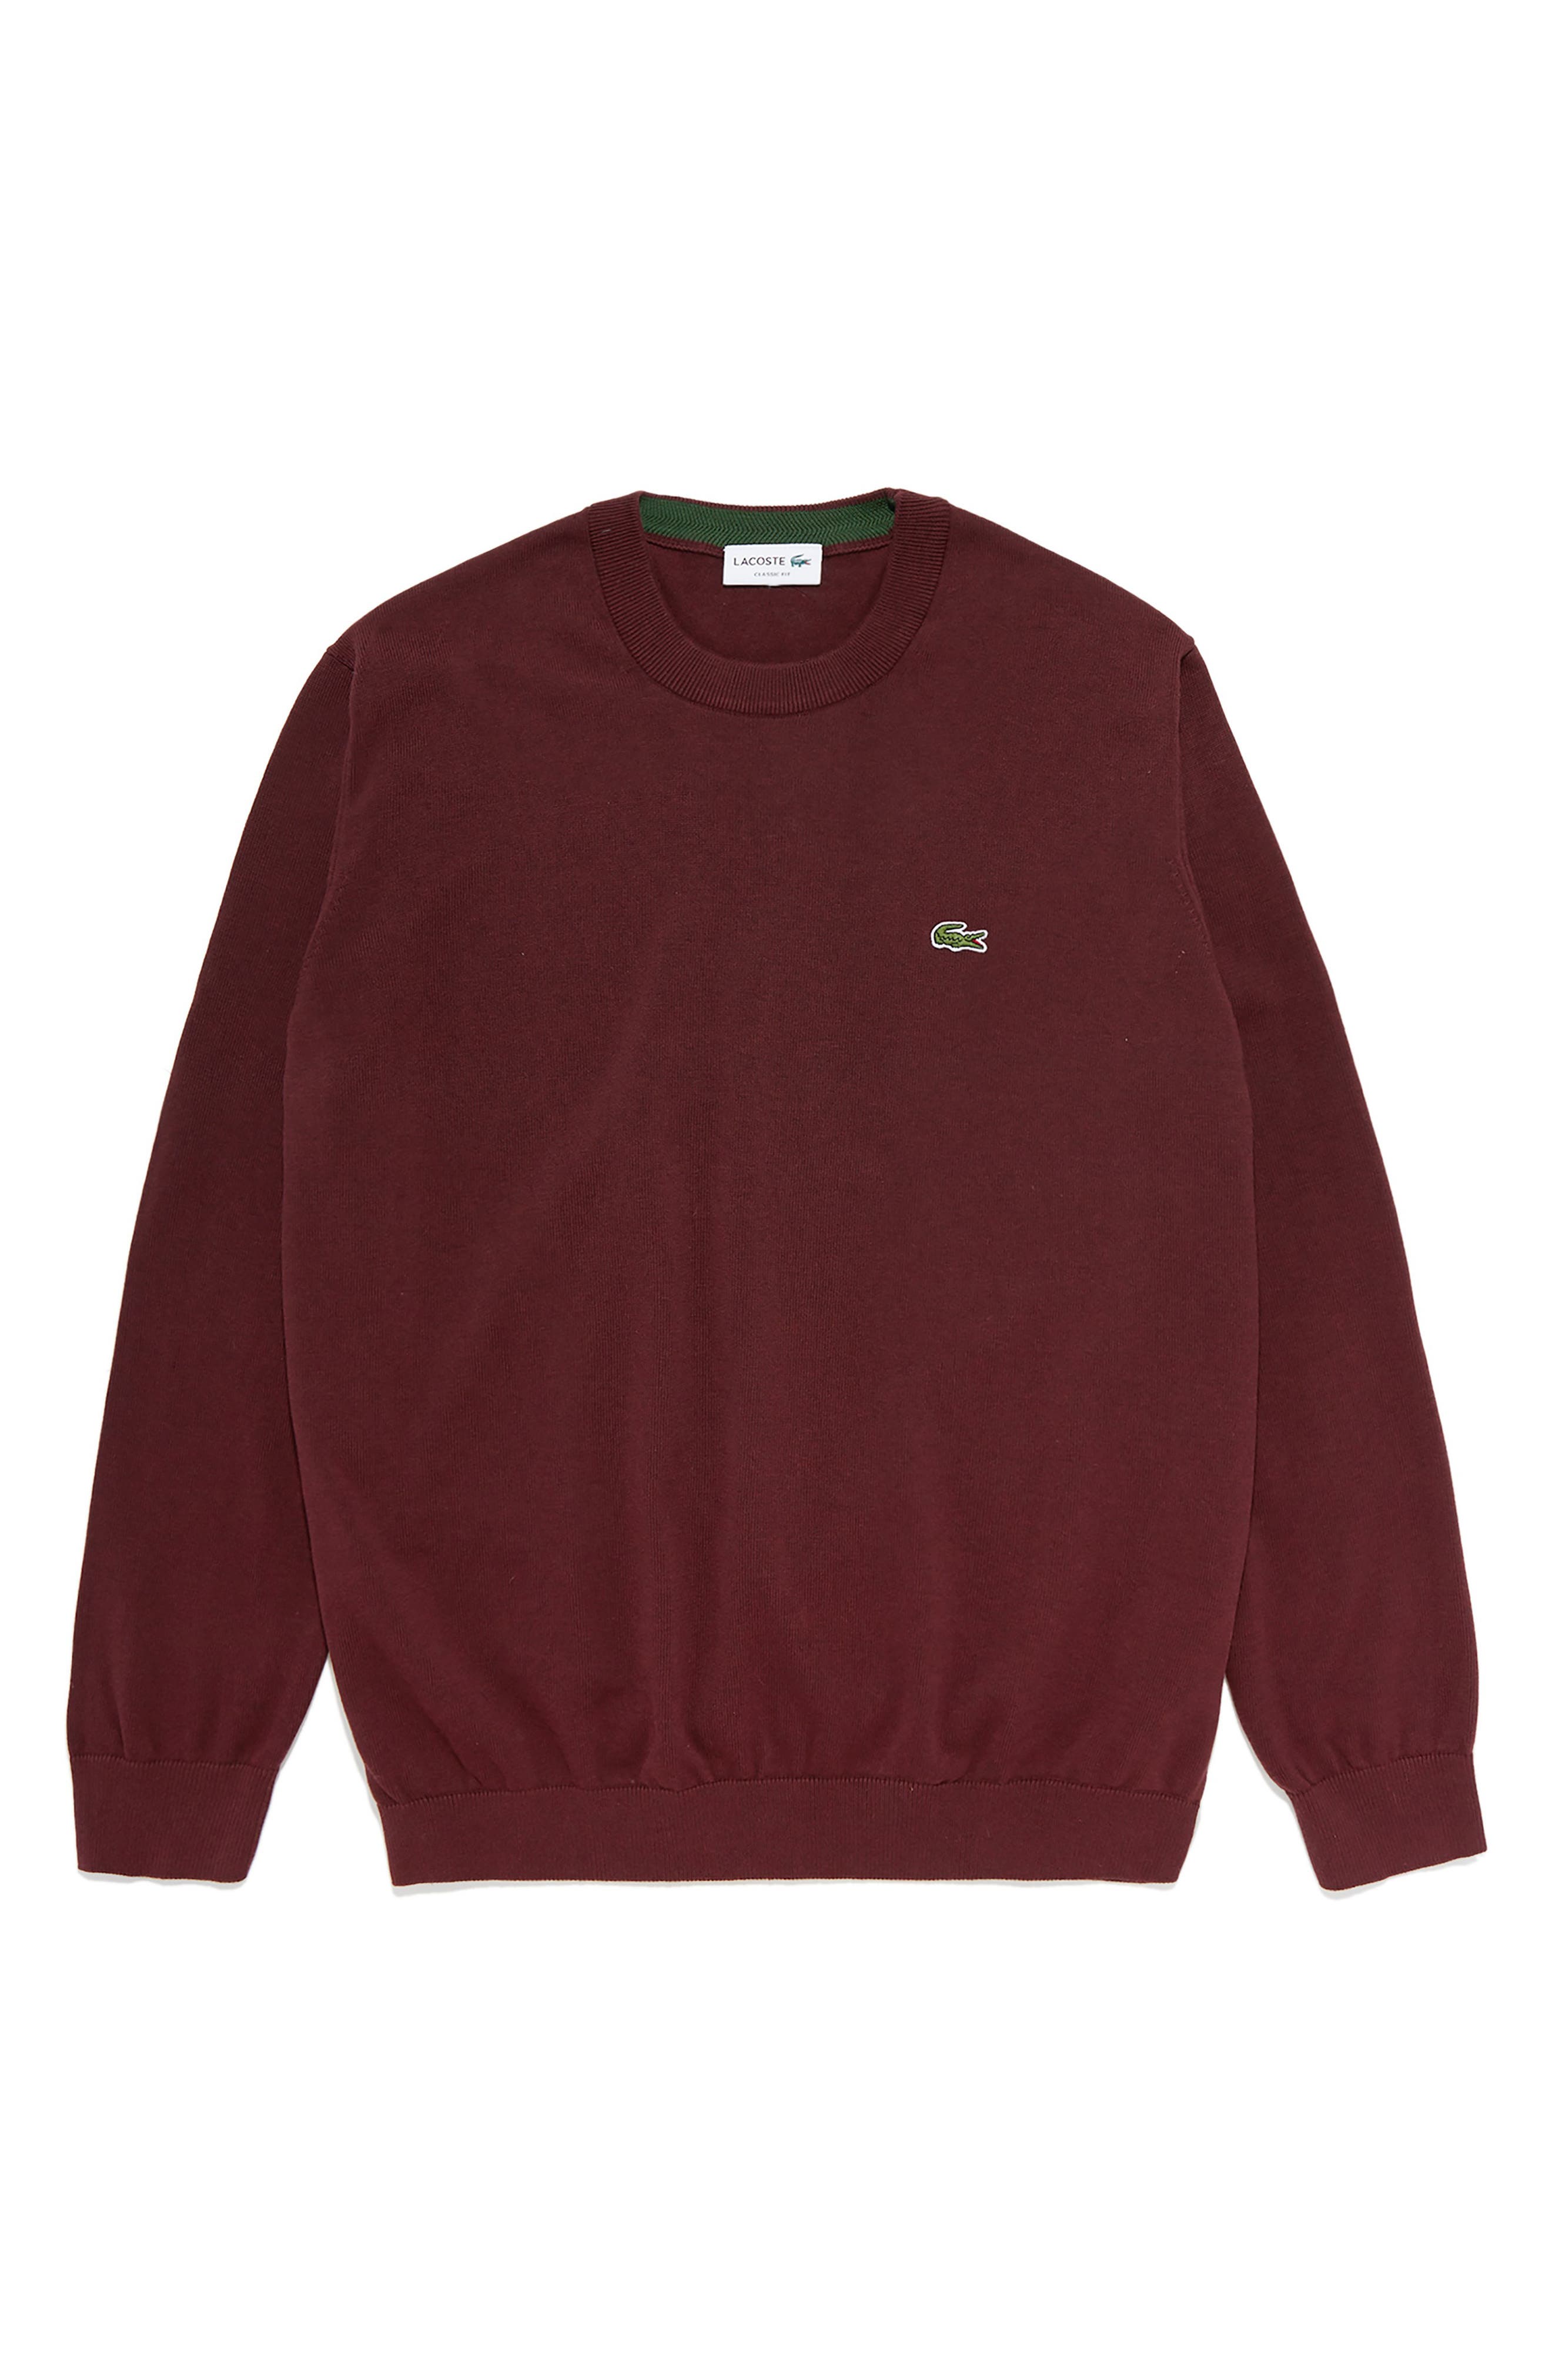 red lacoste sweater